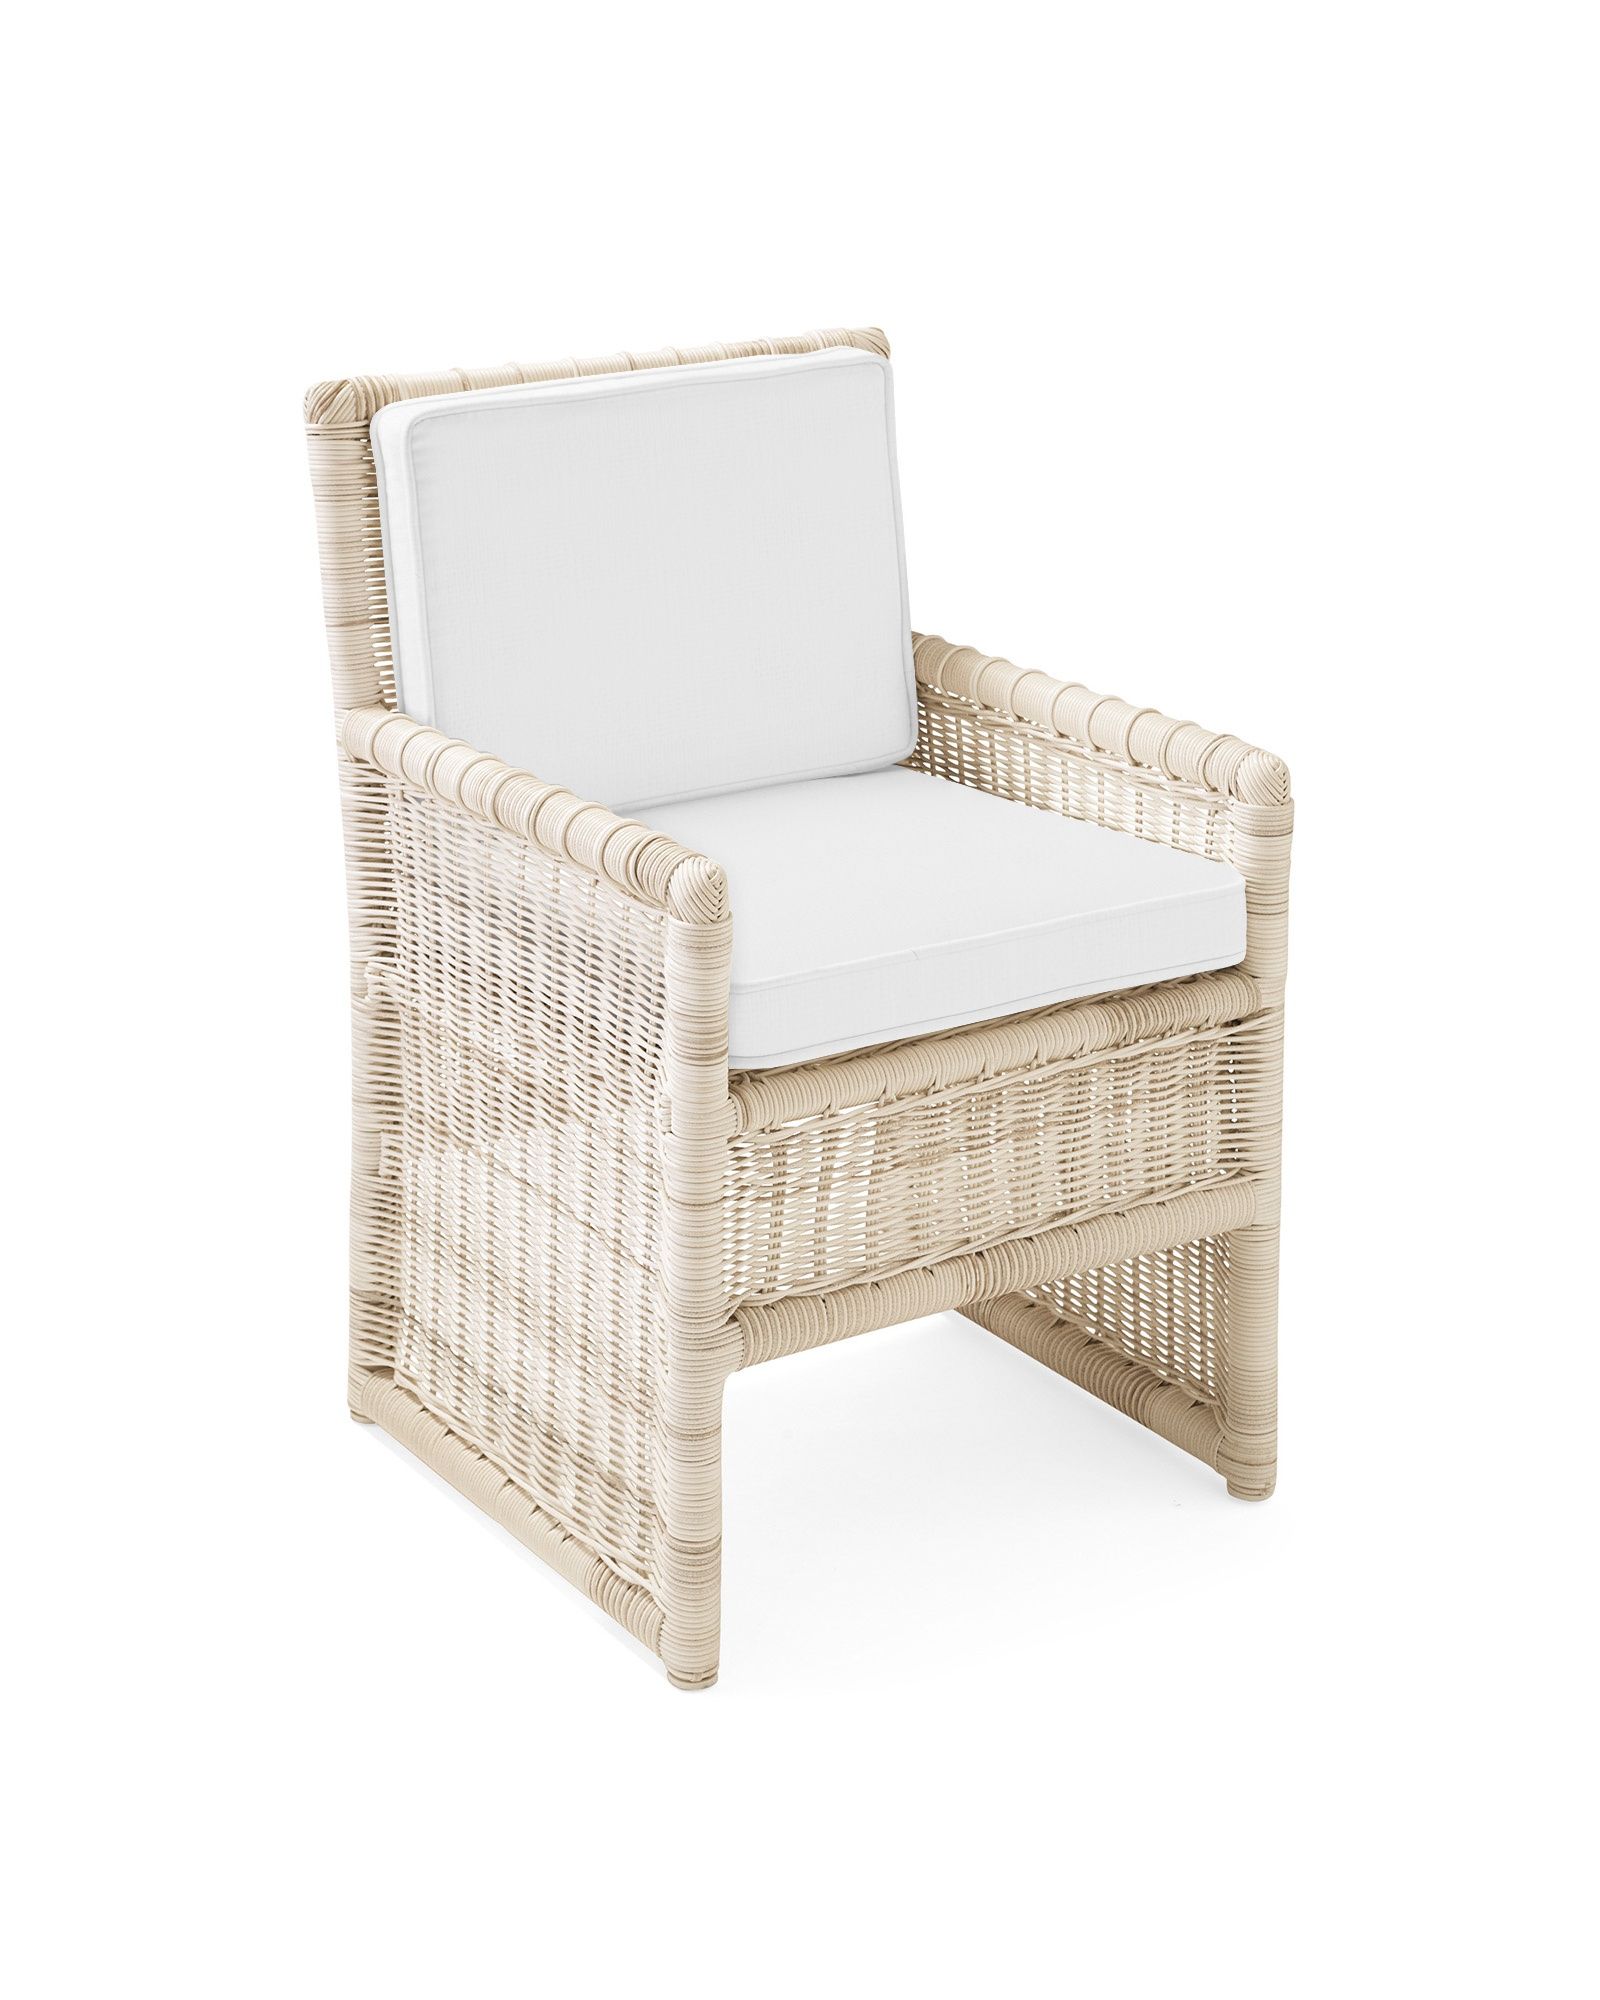 Pacifica Dining Chair - Driftwood | Serena and Lily